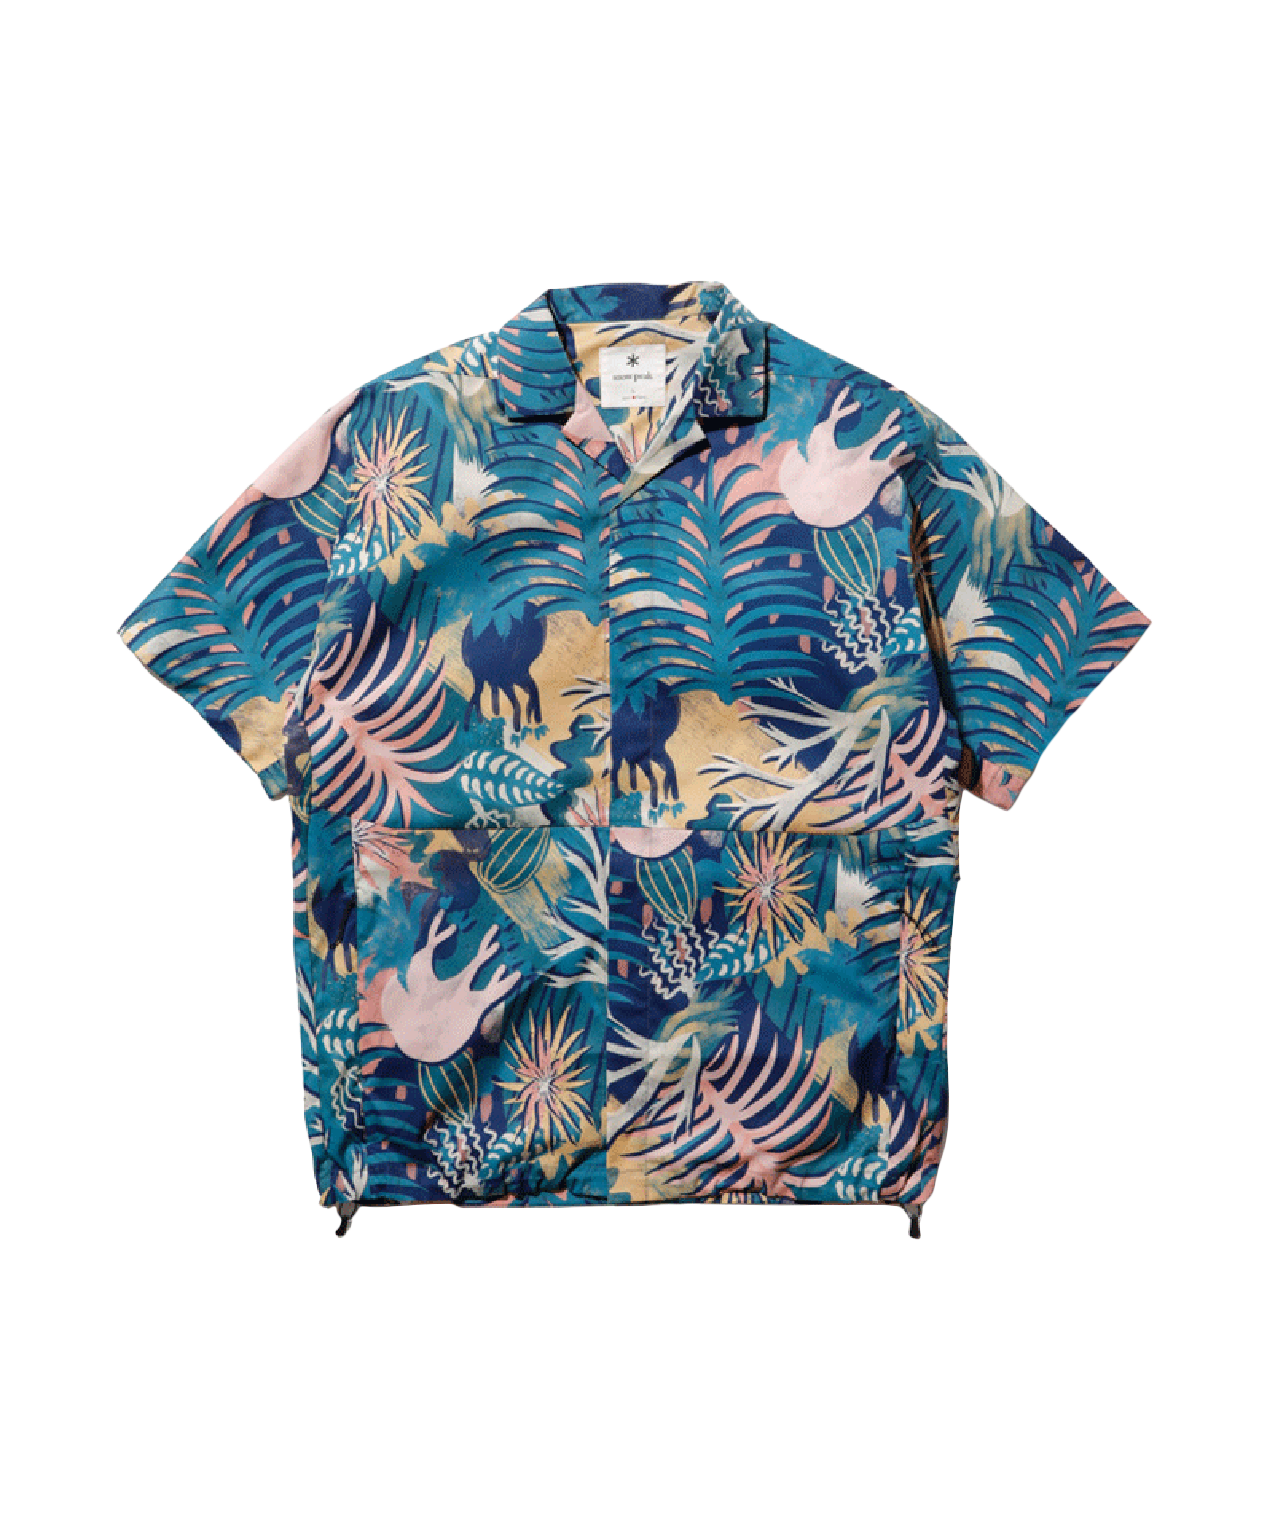 Printed Breathable Quick Dry Shirt